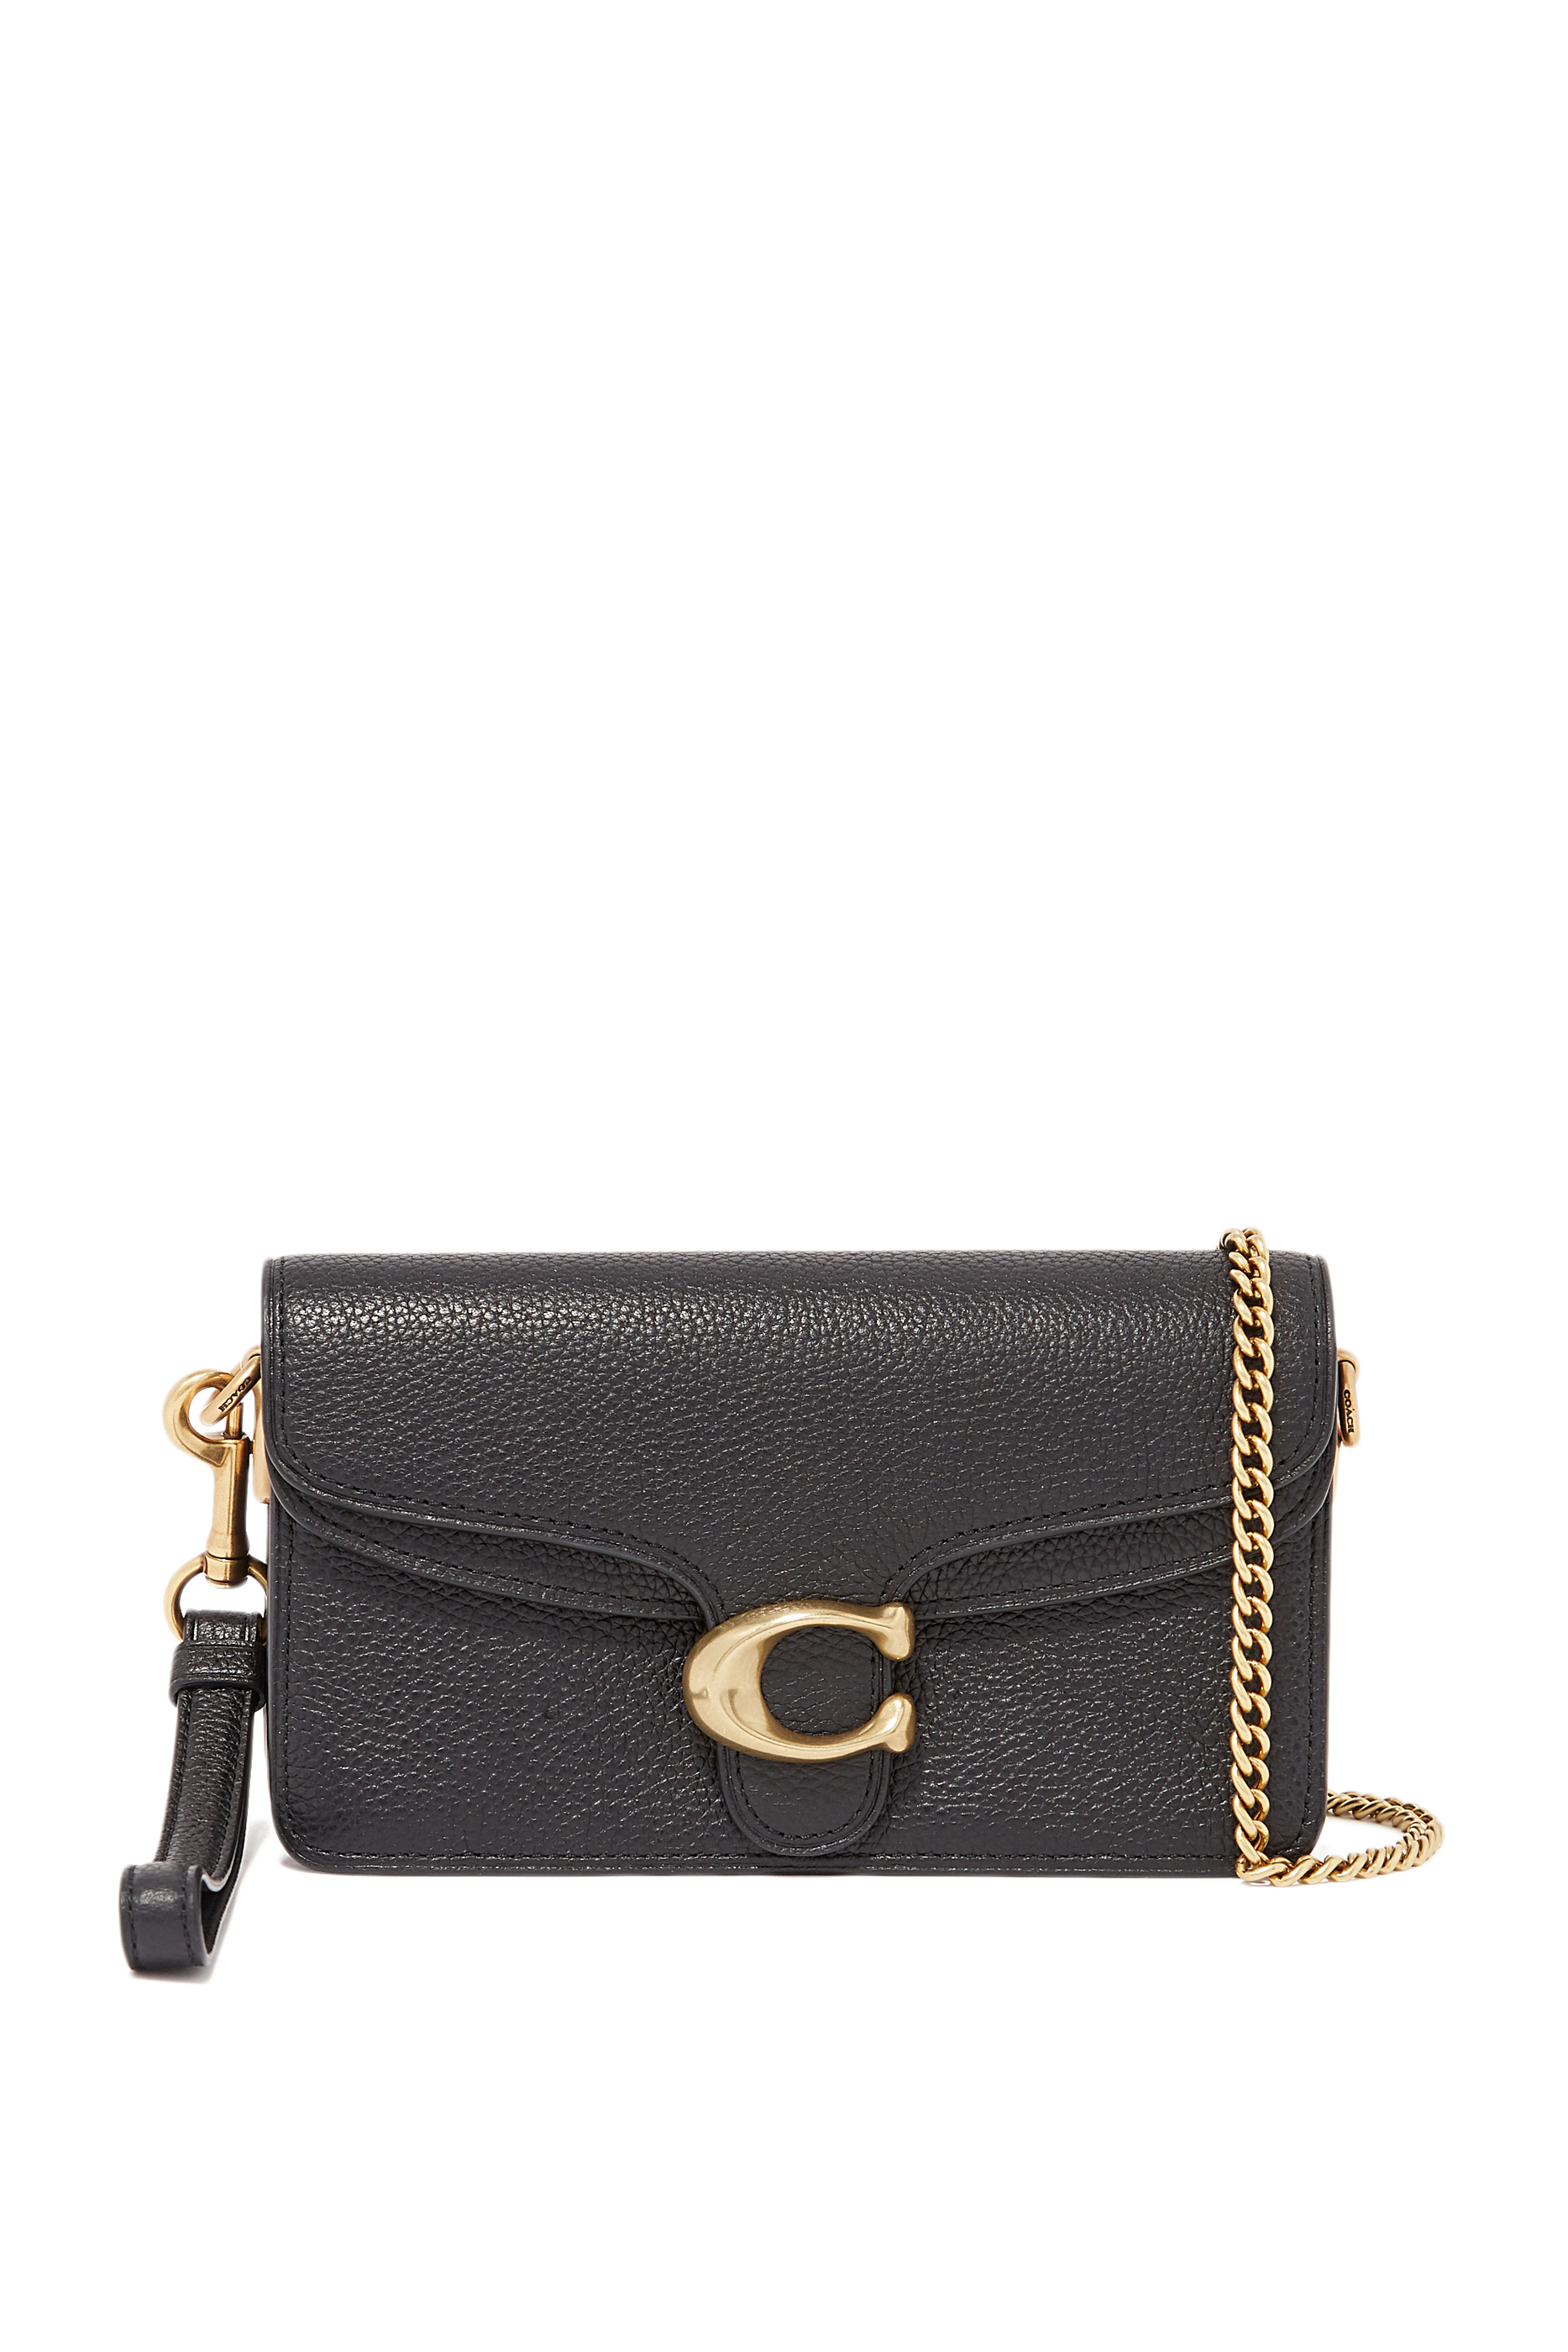 Buy Coach Tabby Crossbody Pebble Leather Bag for Womens | Bloomingdale ...